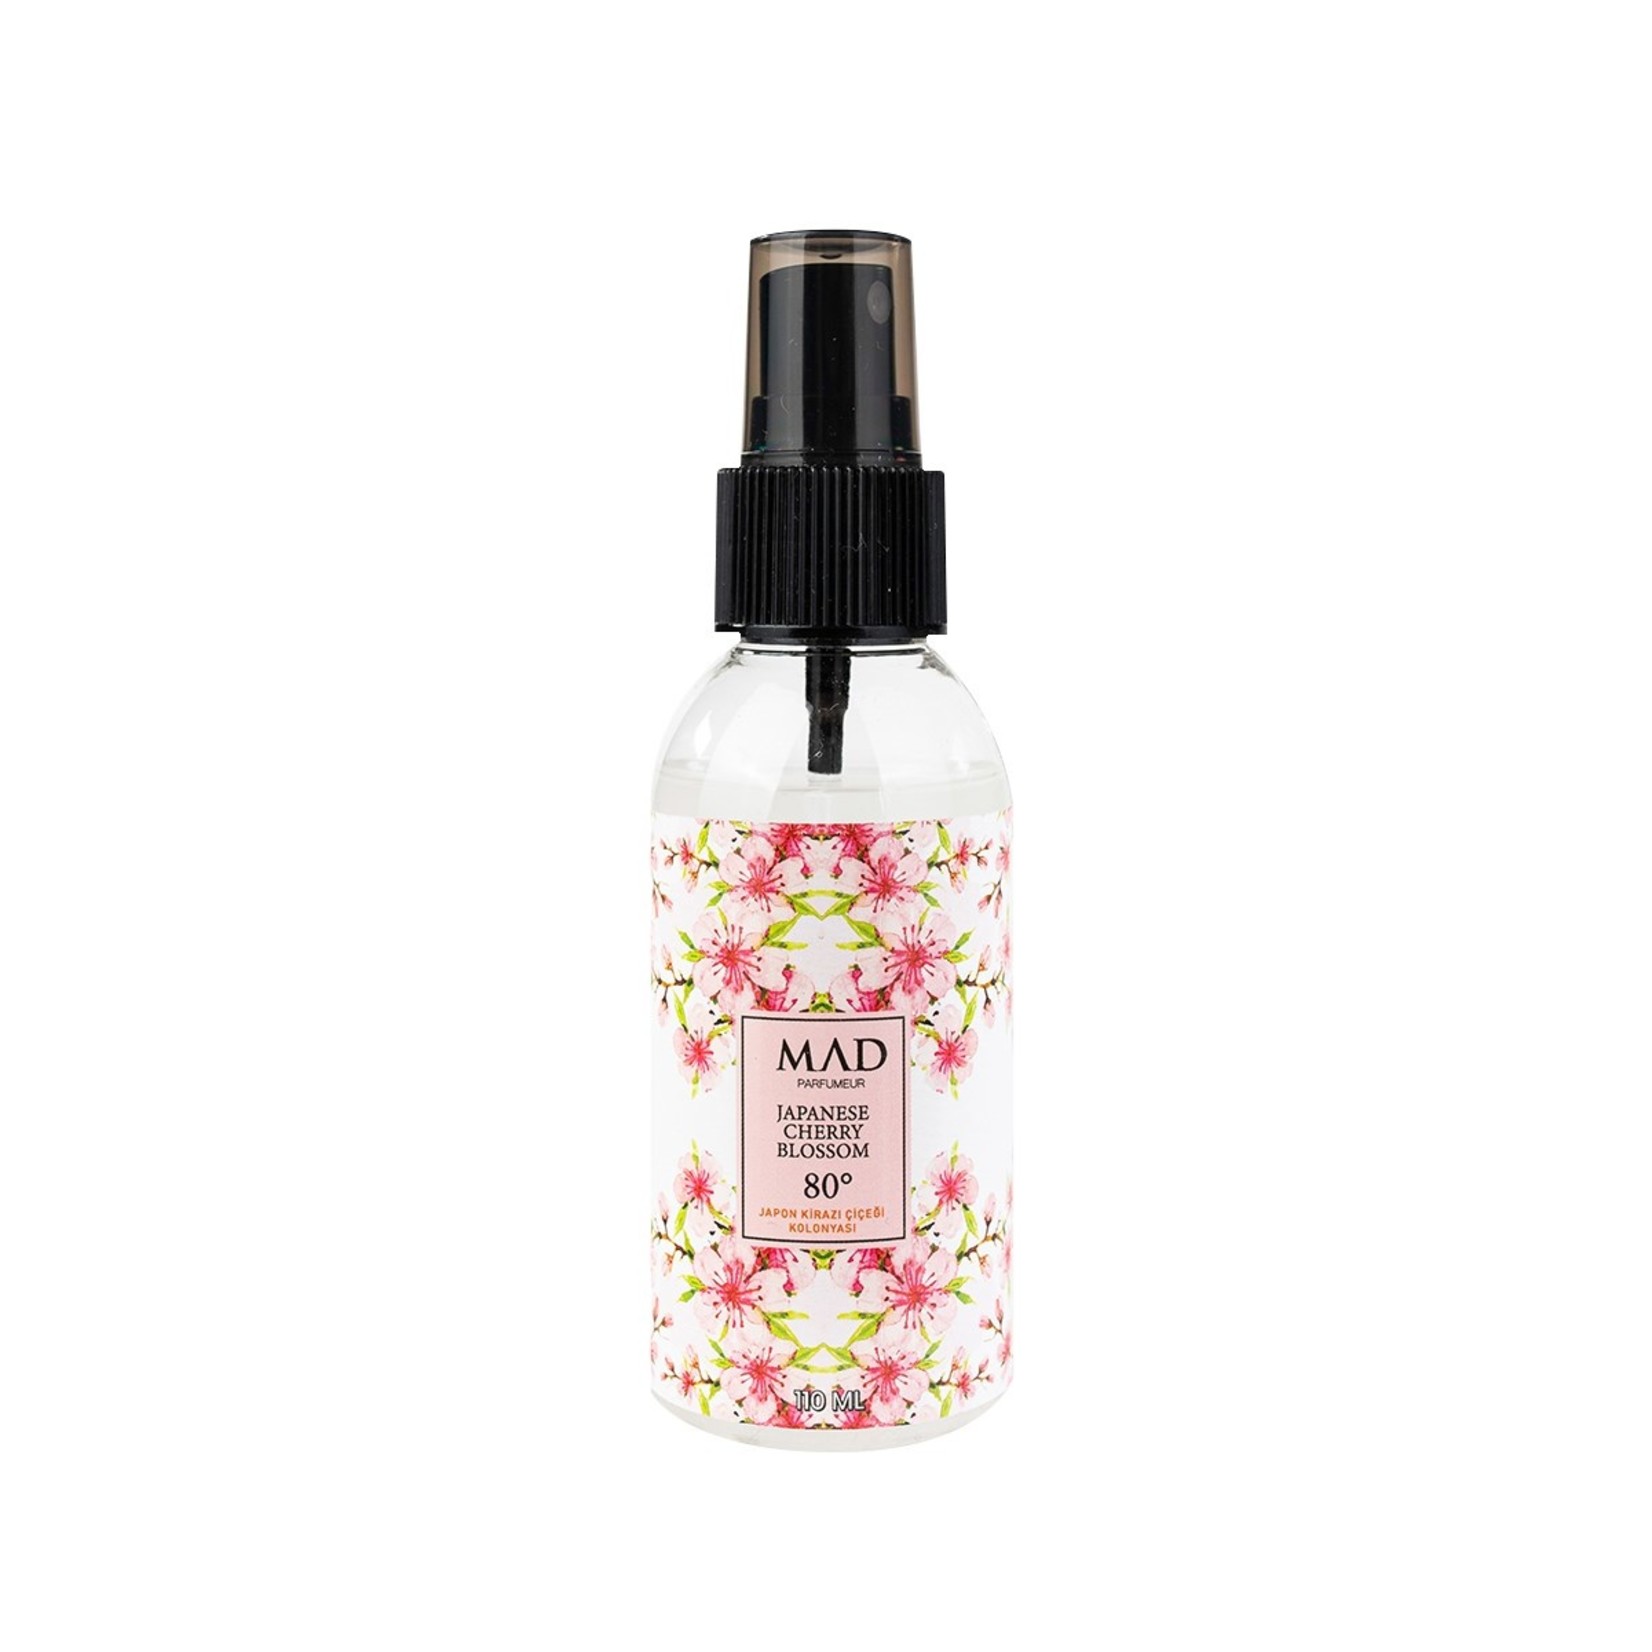 Mad Japanese Cherry Blossom 110 ml Cologne